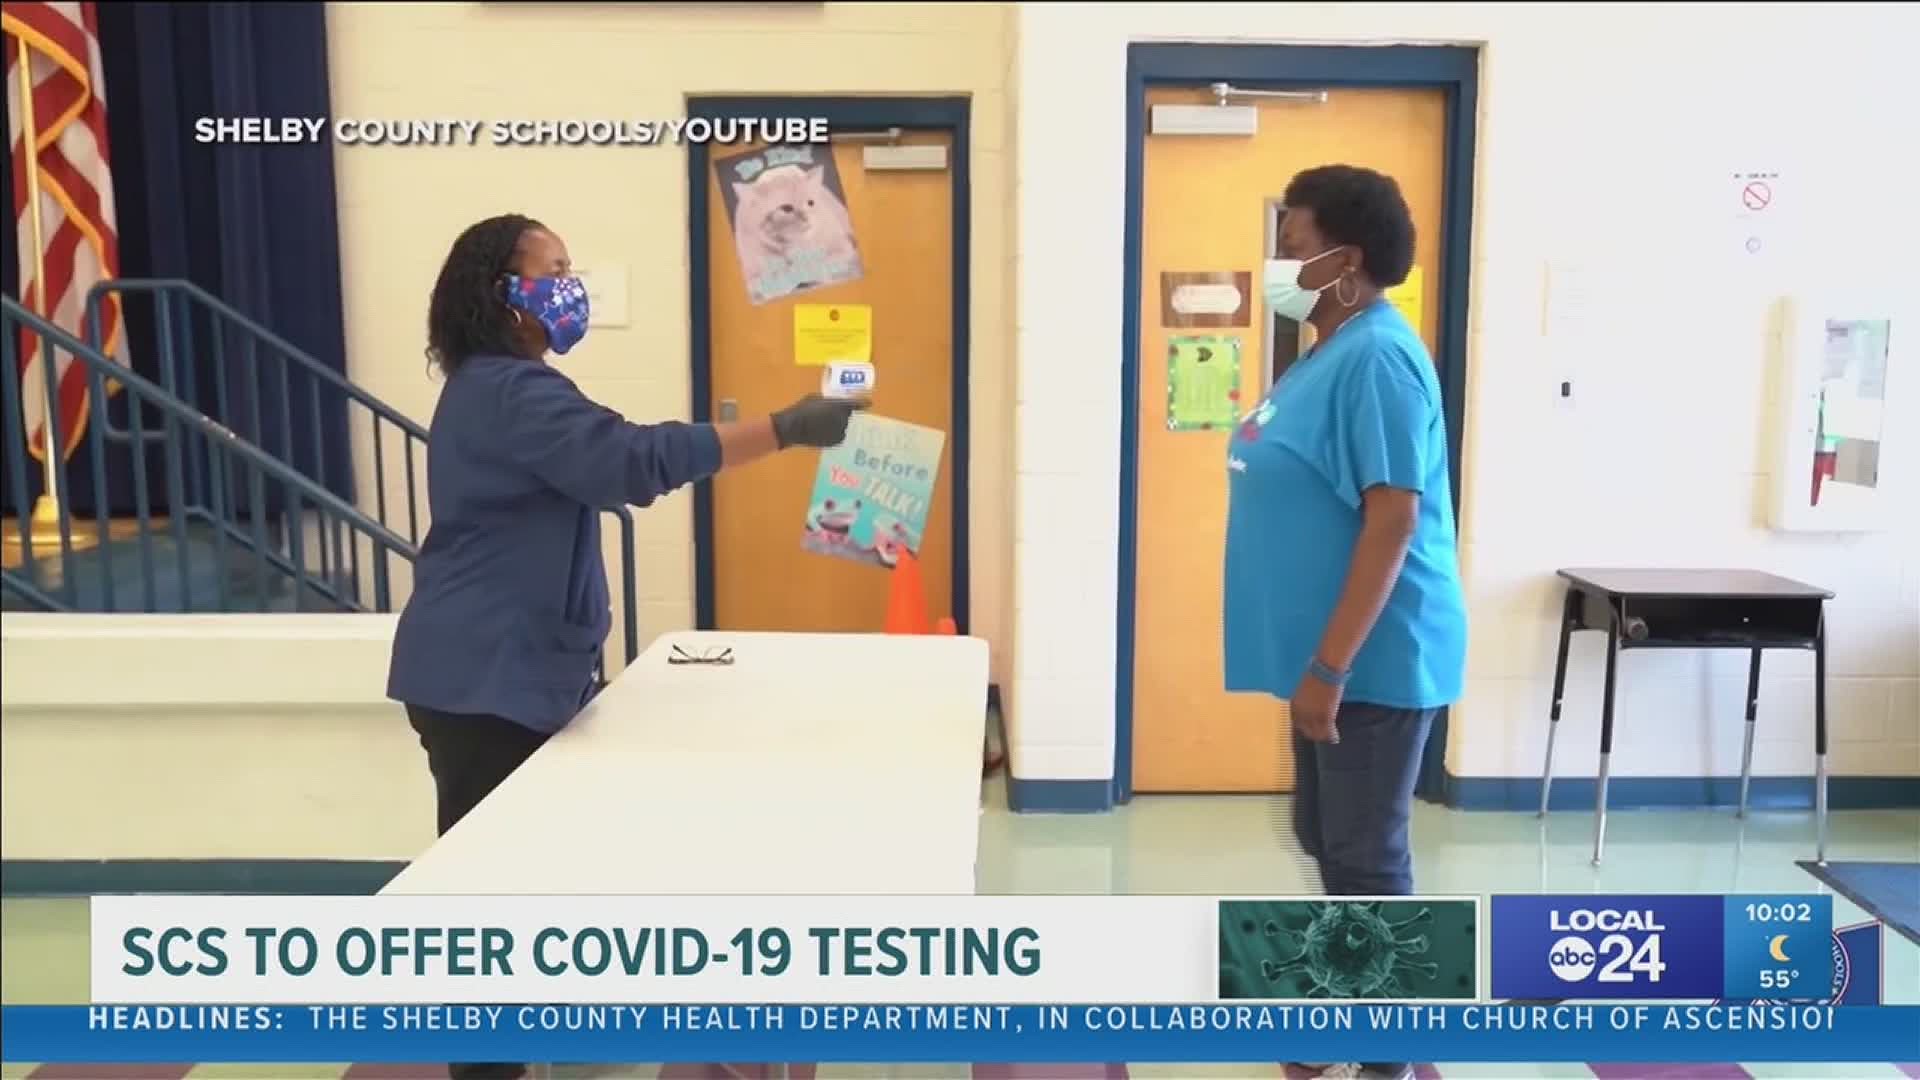 Shelby County Schools eye COVID-19 testing to begin in the month of March.